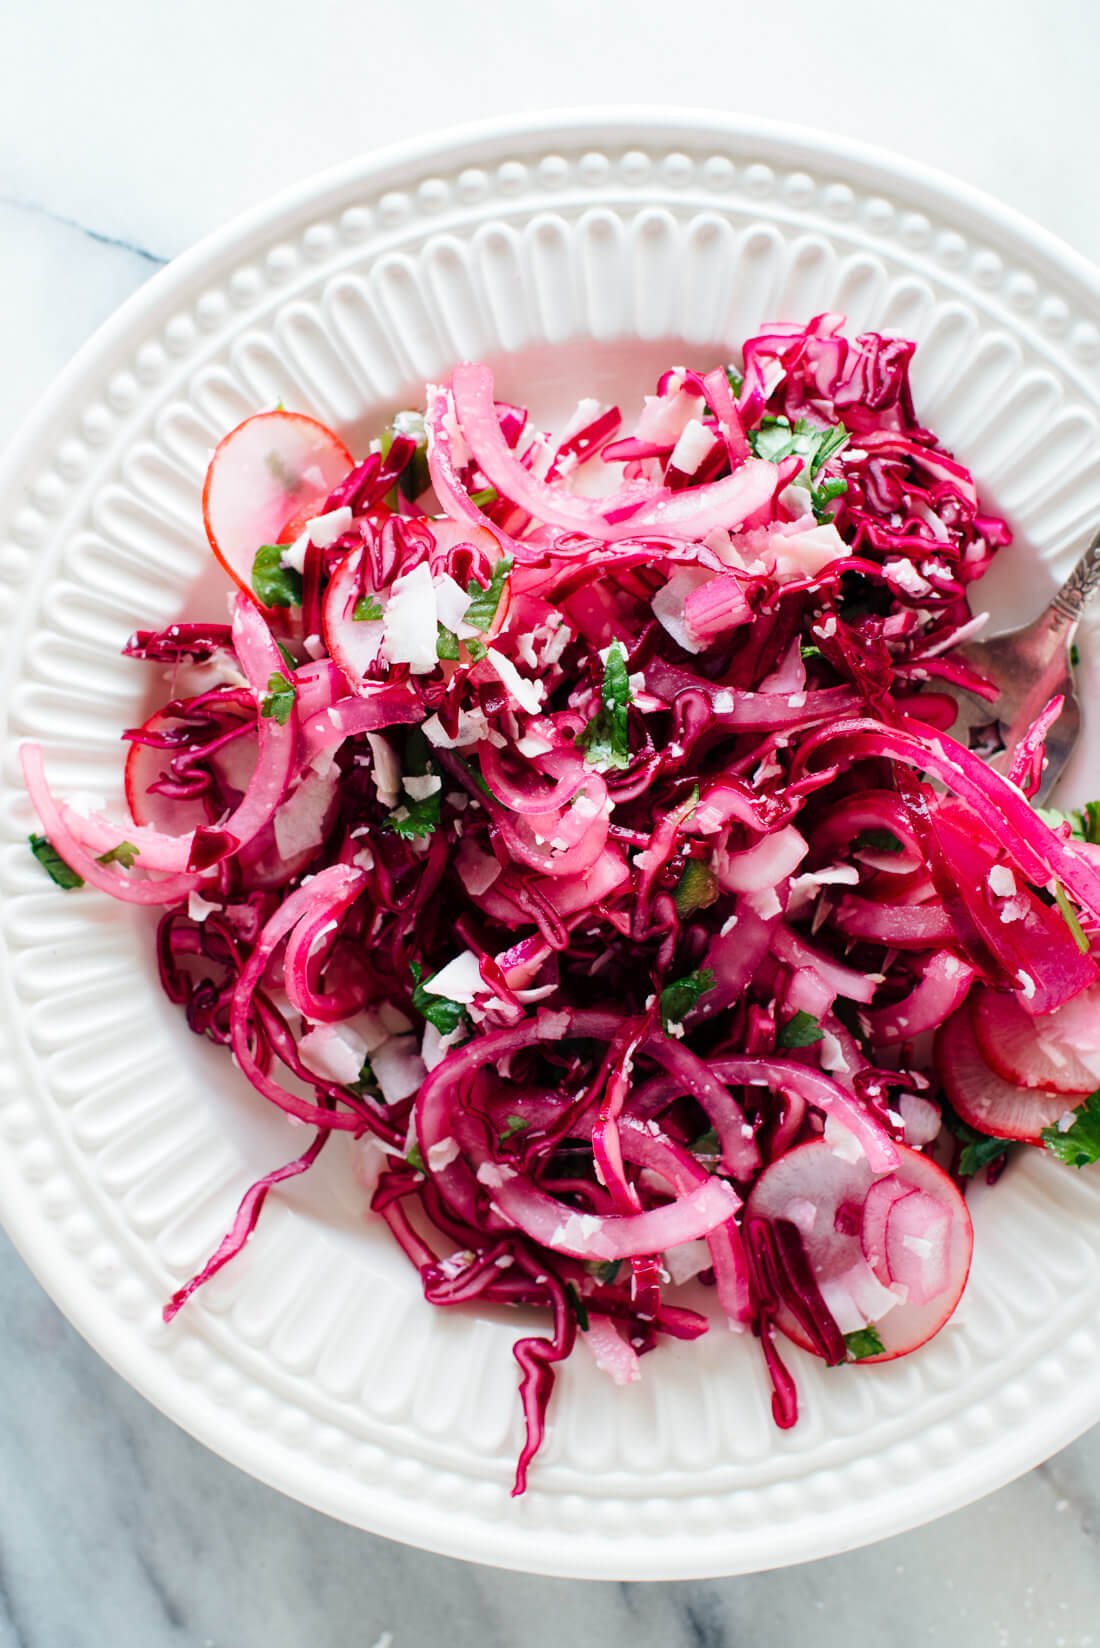 Coconut lovers, you're going to love this coconut cabbage slaw recipe! Get it at cookieandkate.com #vegan #glutenfree